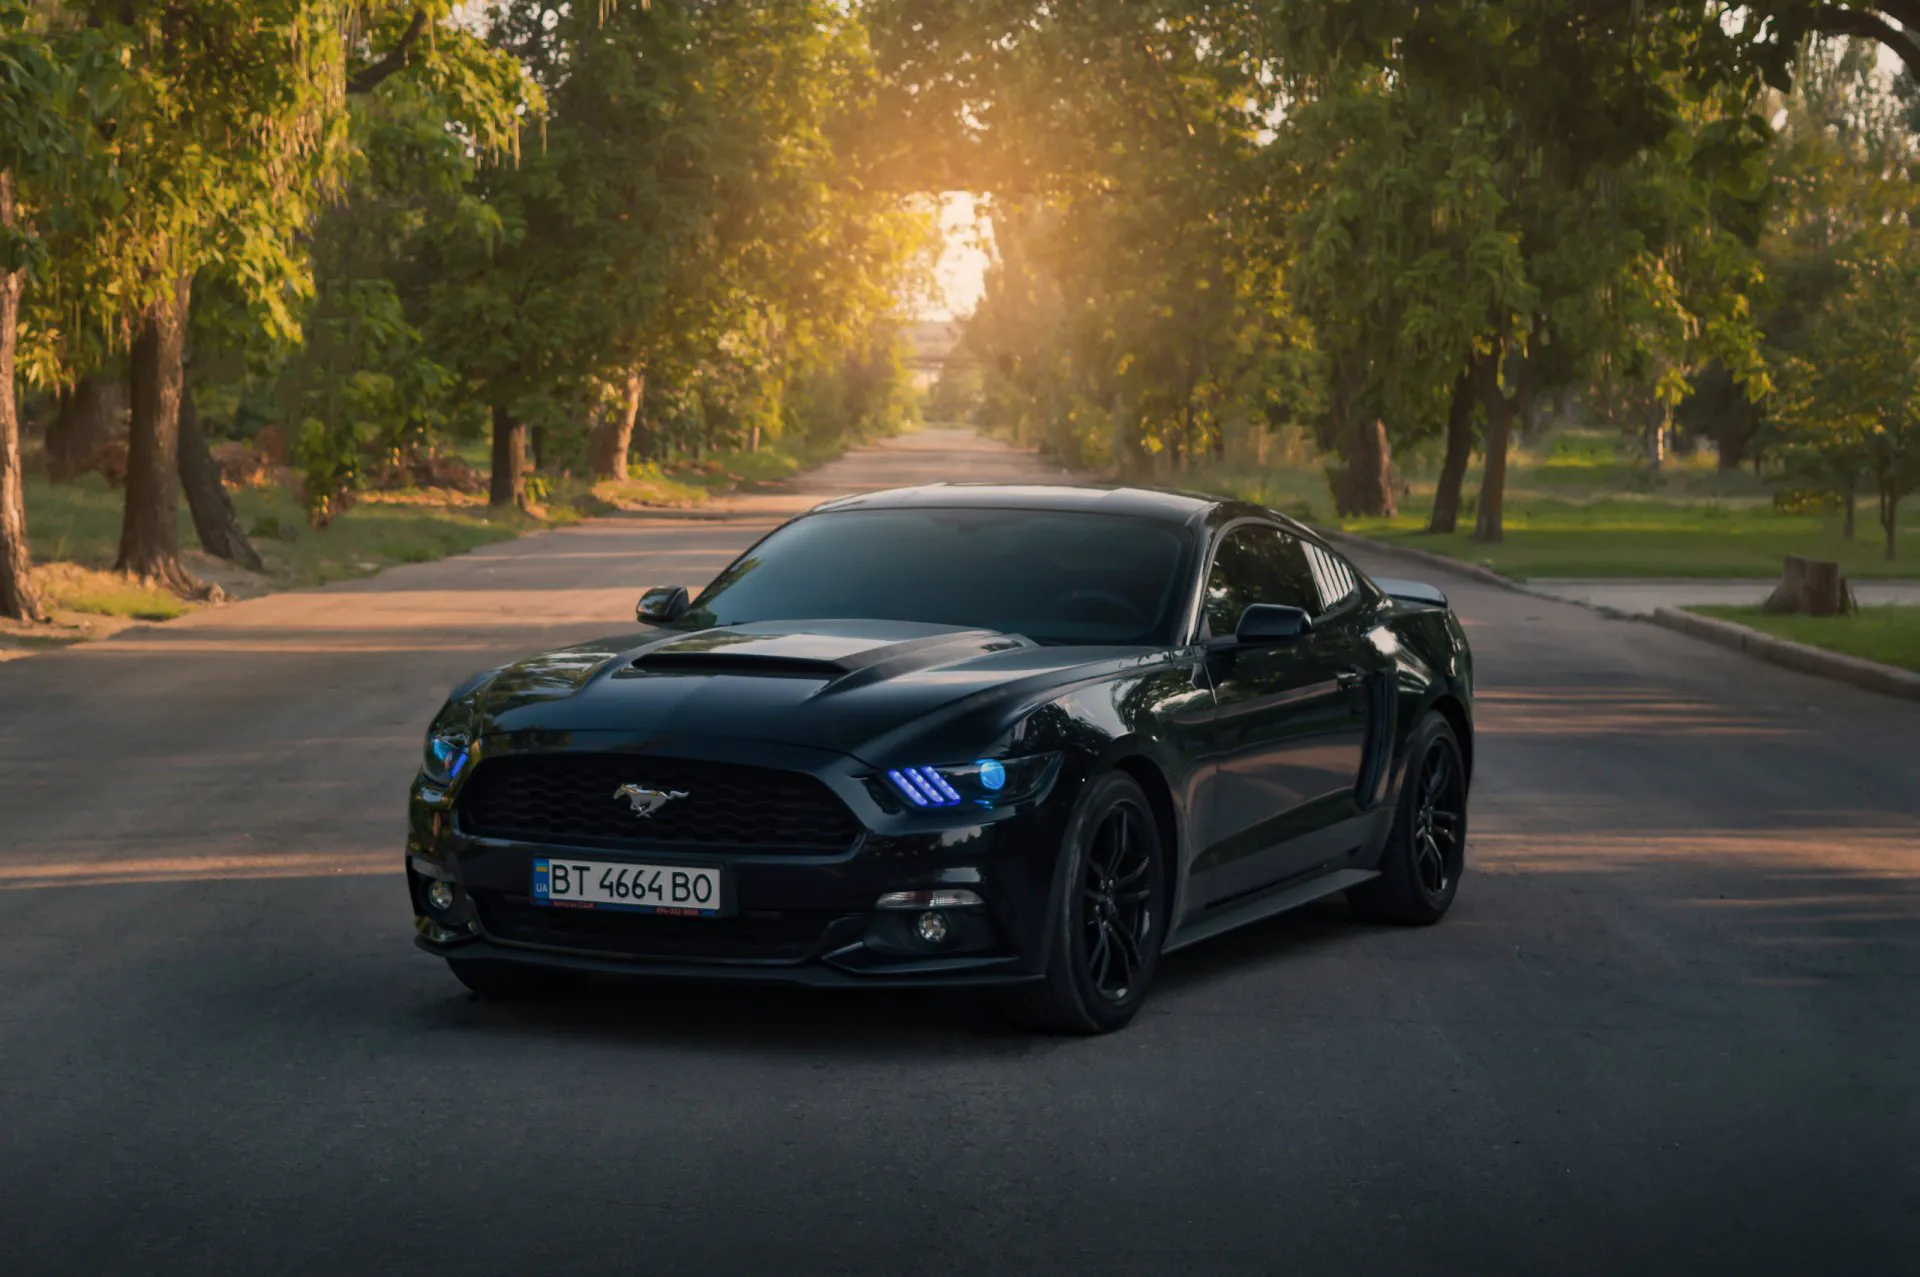 2016 Ford Mustang in a black color with blue headlights.